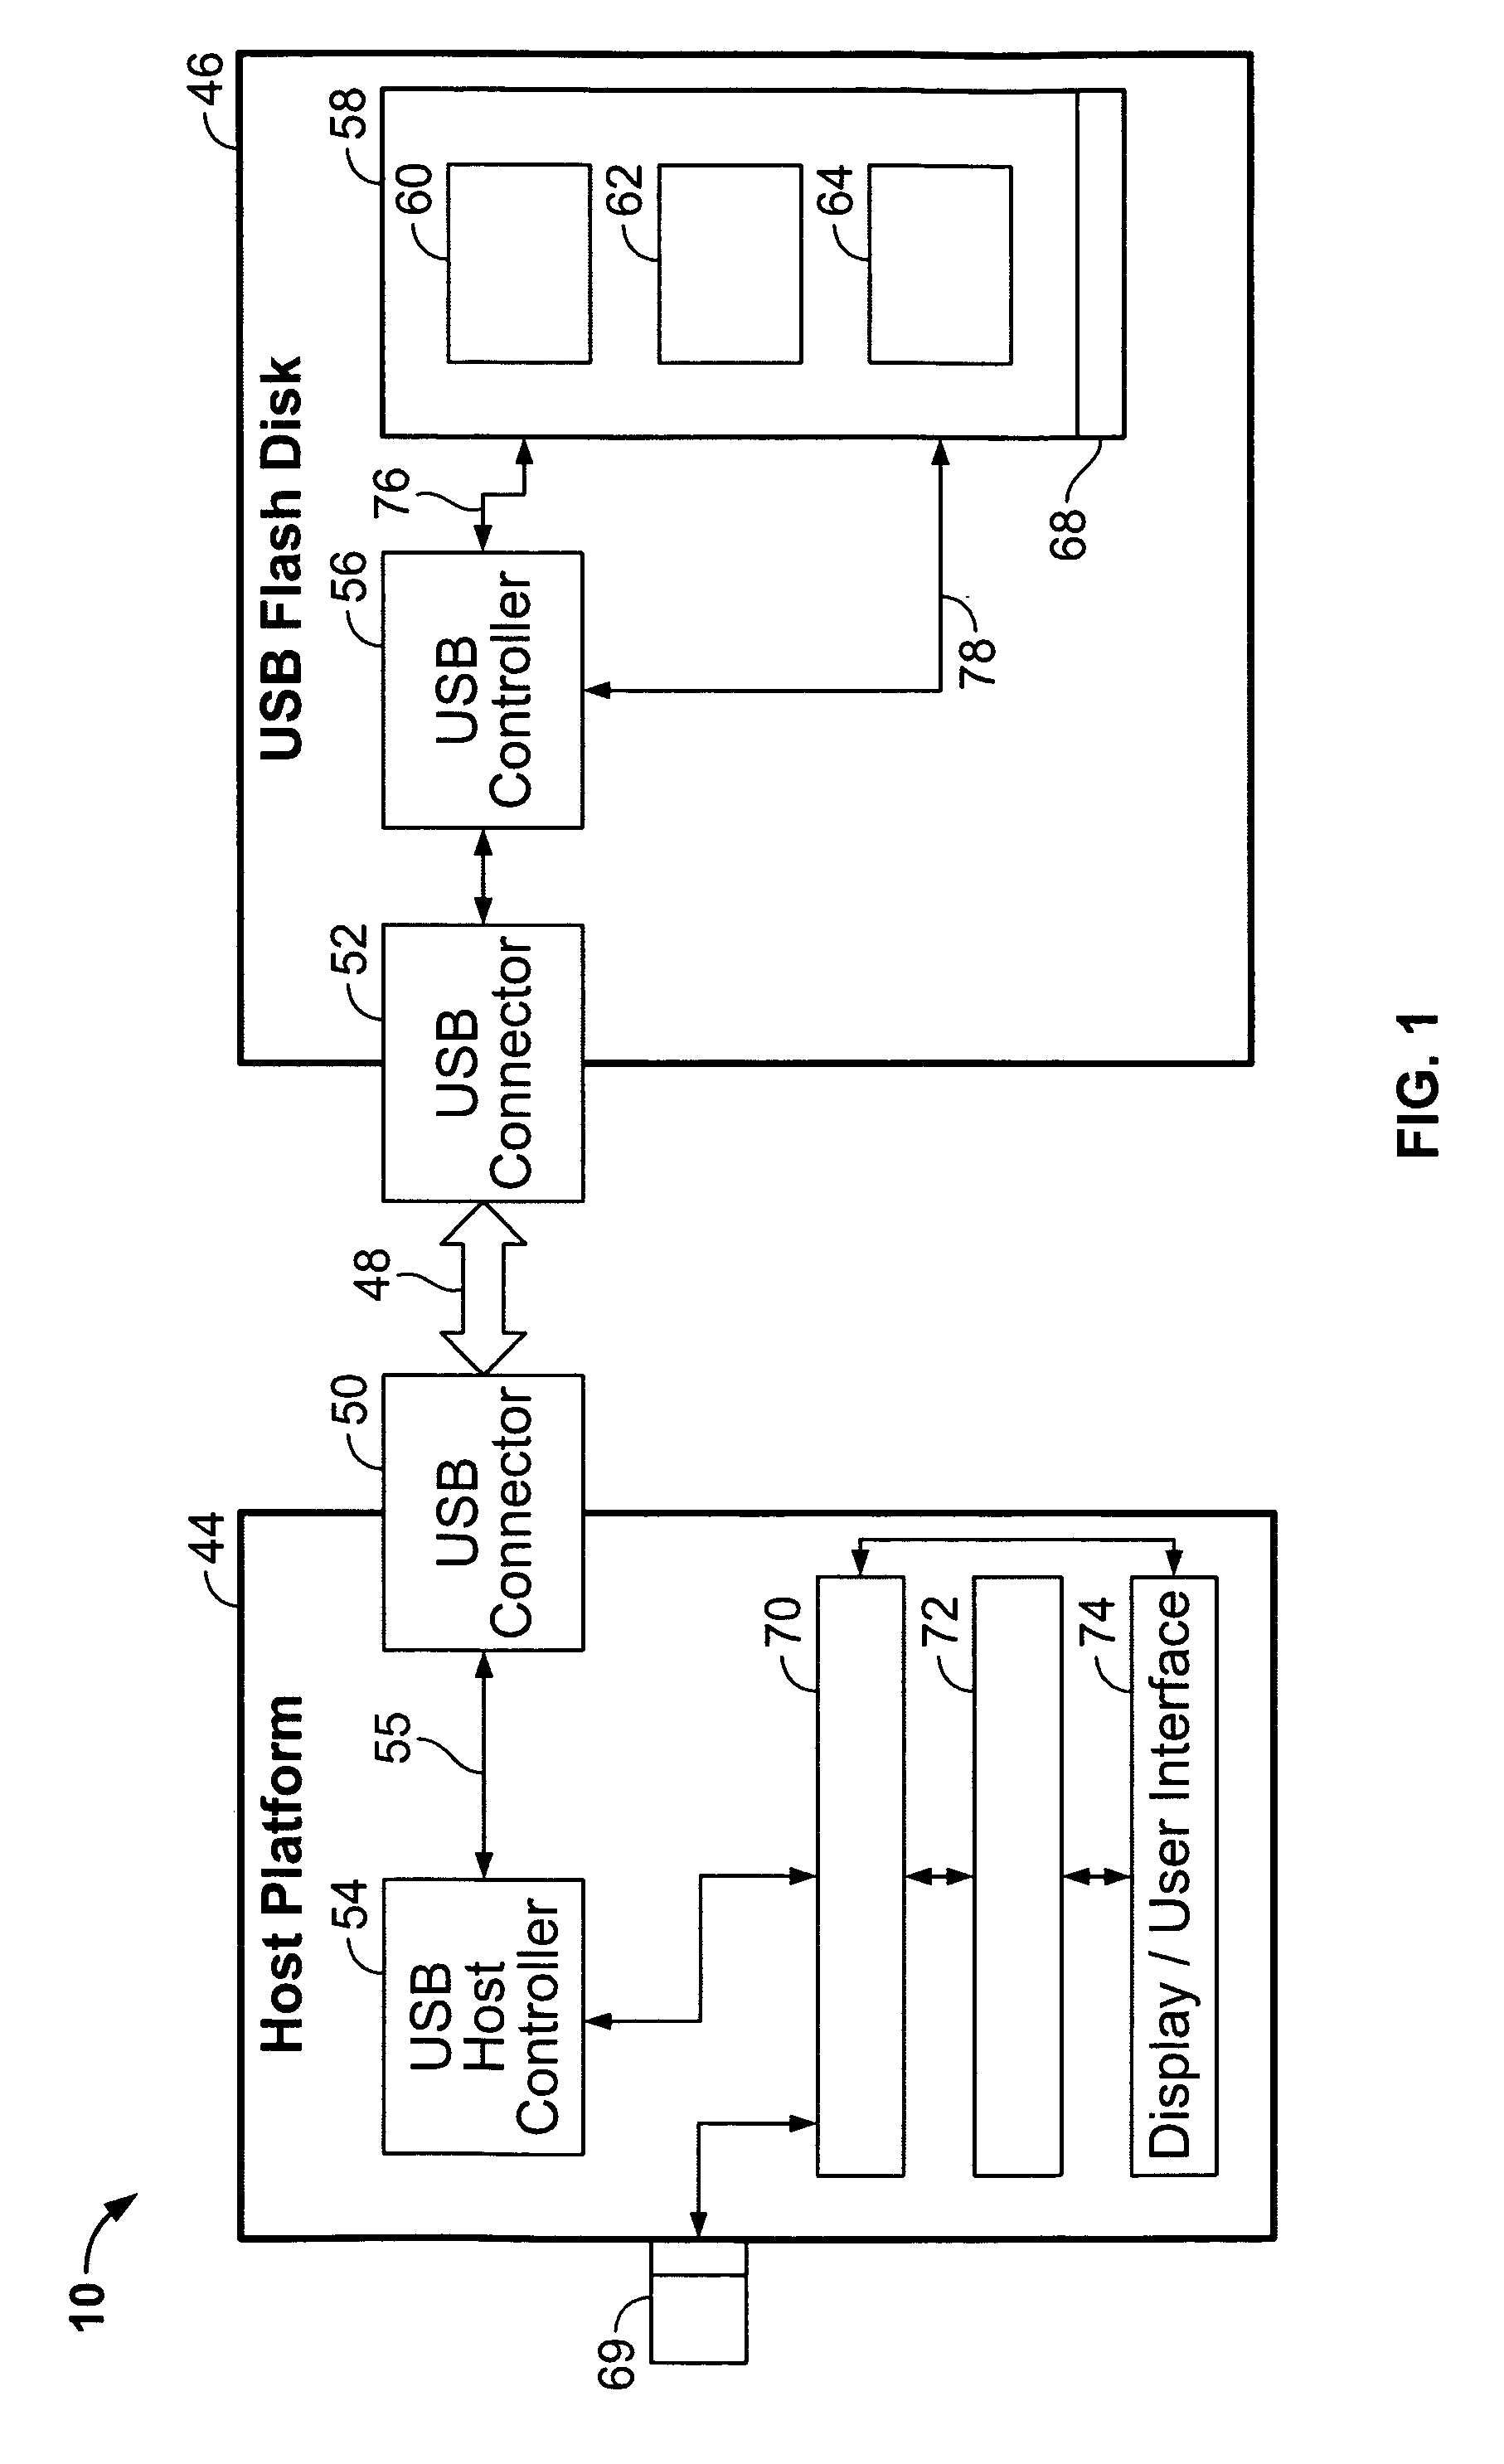 Methods and apparatus providing portable application and data